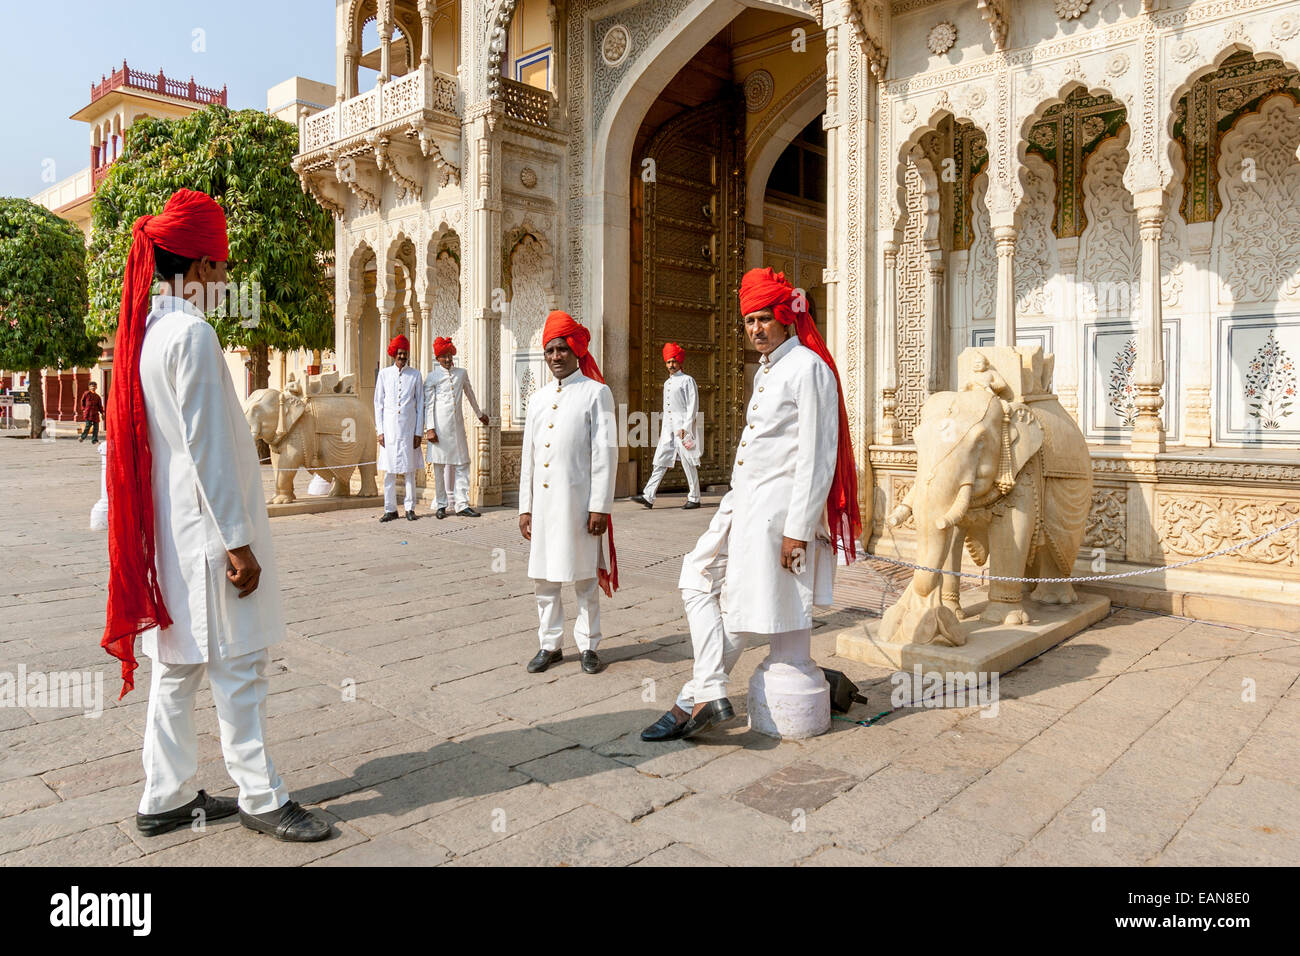 Palace Guards At The Entrance To The City Palace, Jaipur, Rajasthan, India Stock Photo